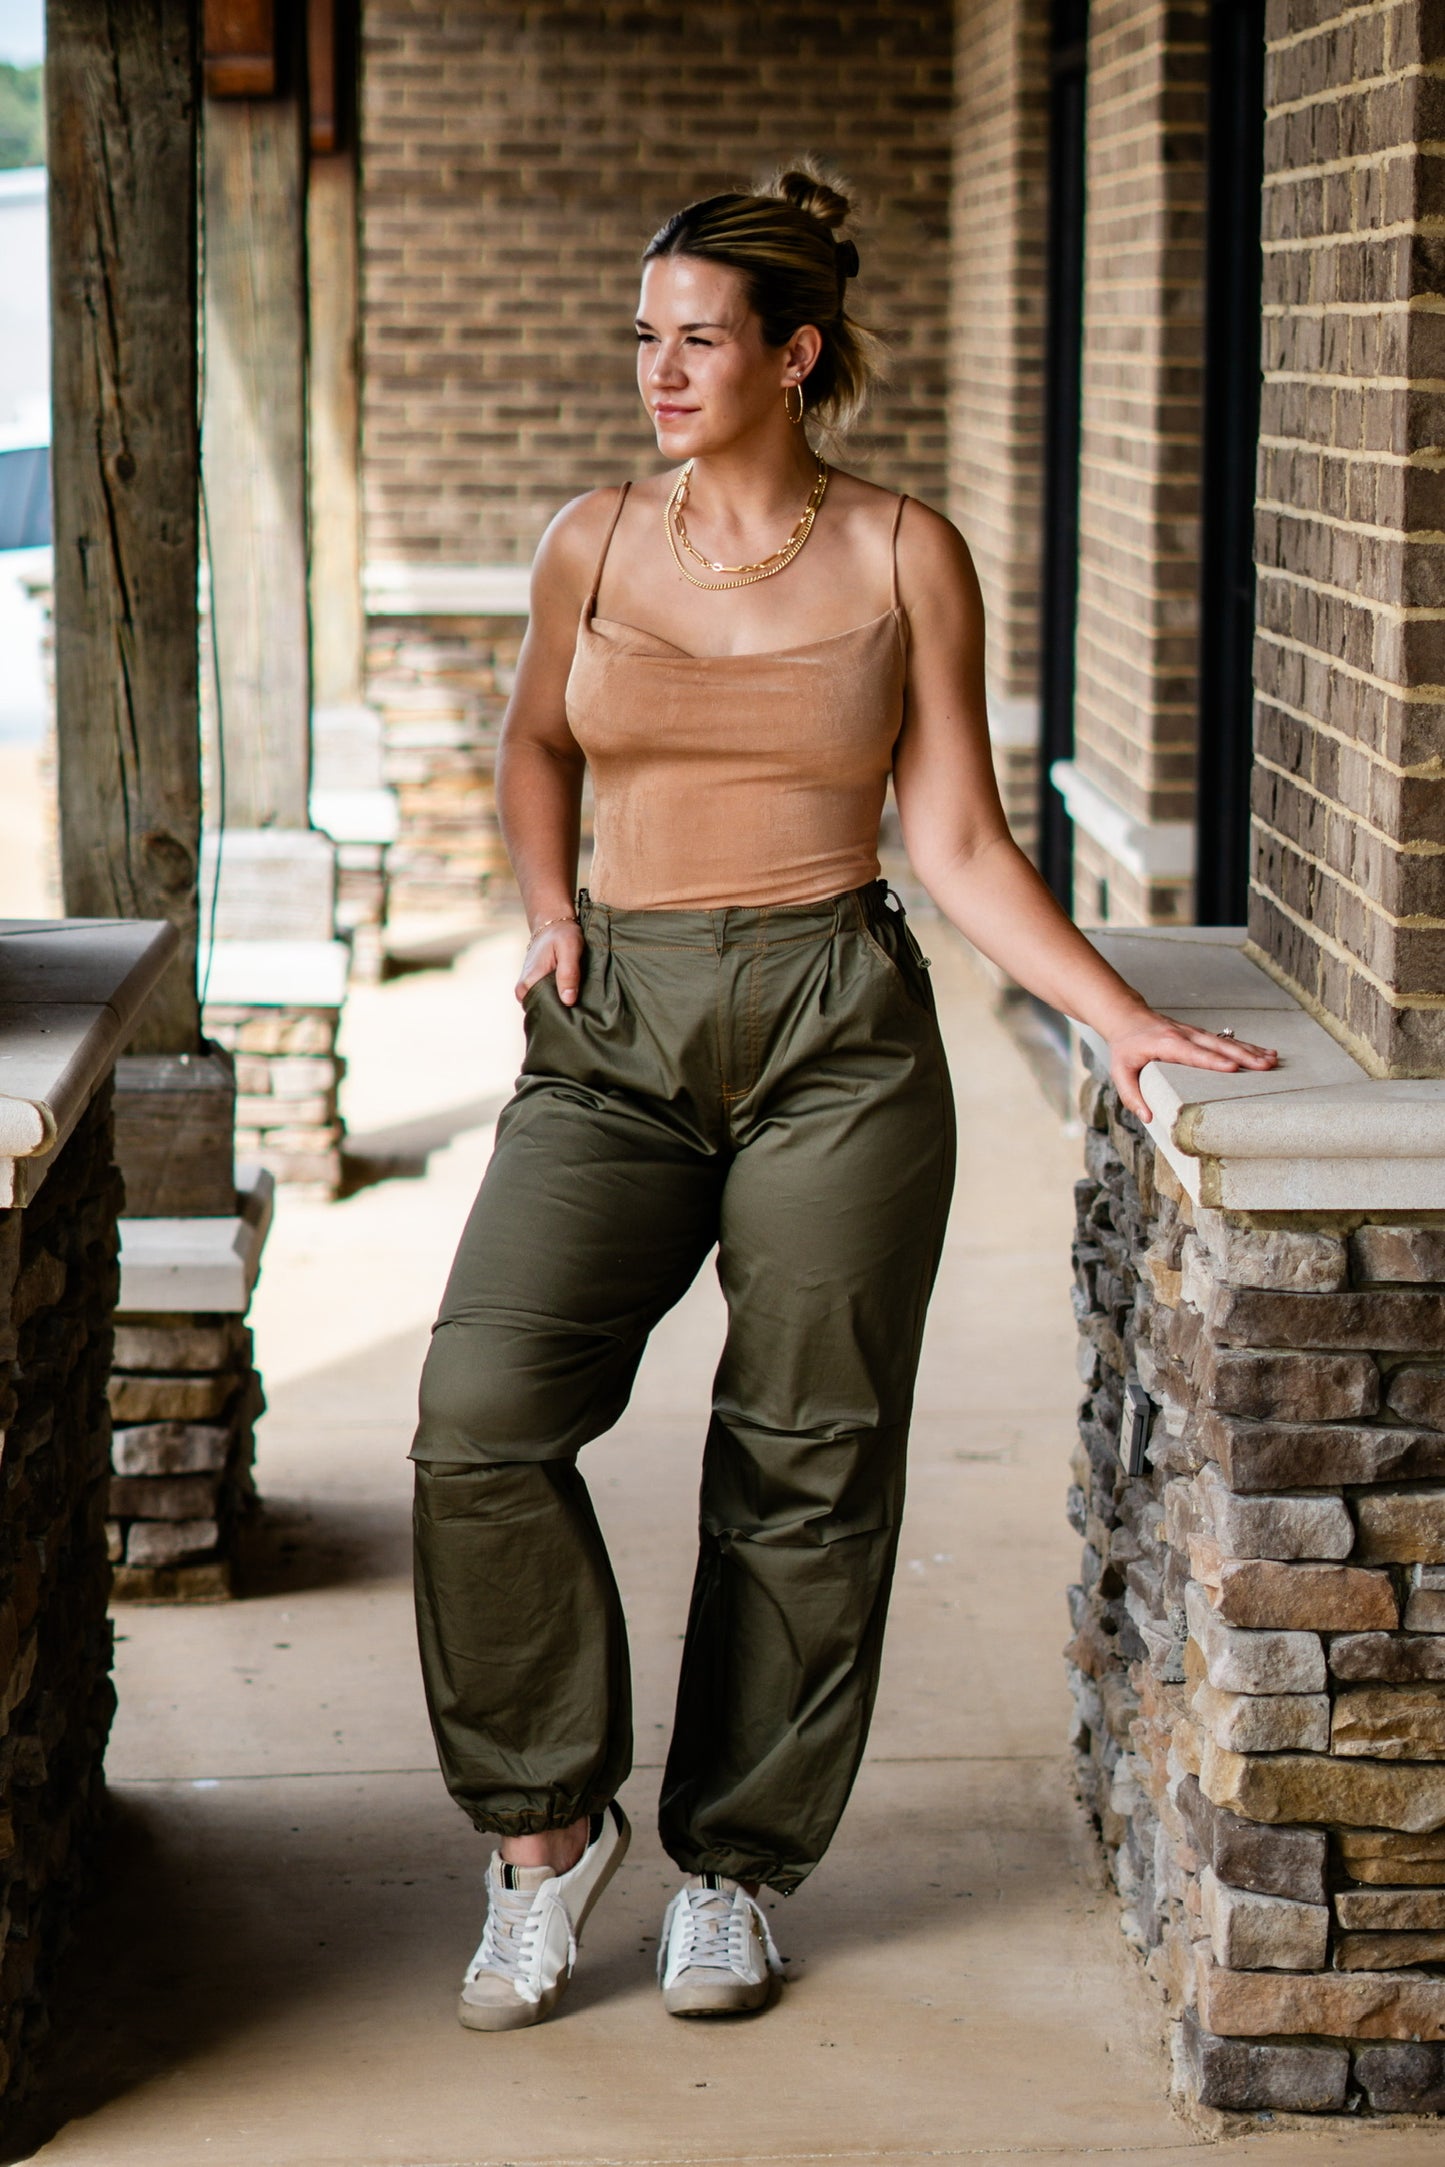 Polly Parachute Jogger Pants Elastic Waistband w/ Zipper Fly and Button Closure Full Length Legs Cinched at the Ankle Pockets Dark Olive Color. Blonde model, tan bodysuit, sneakers. Stone and brick background.